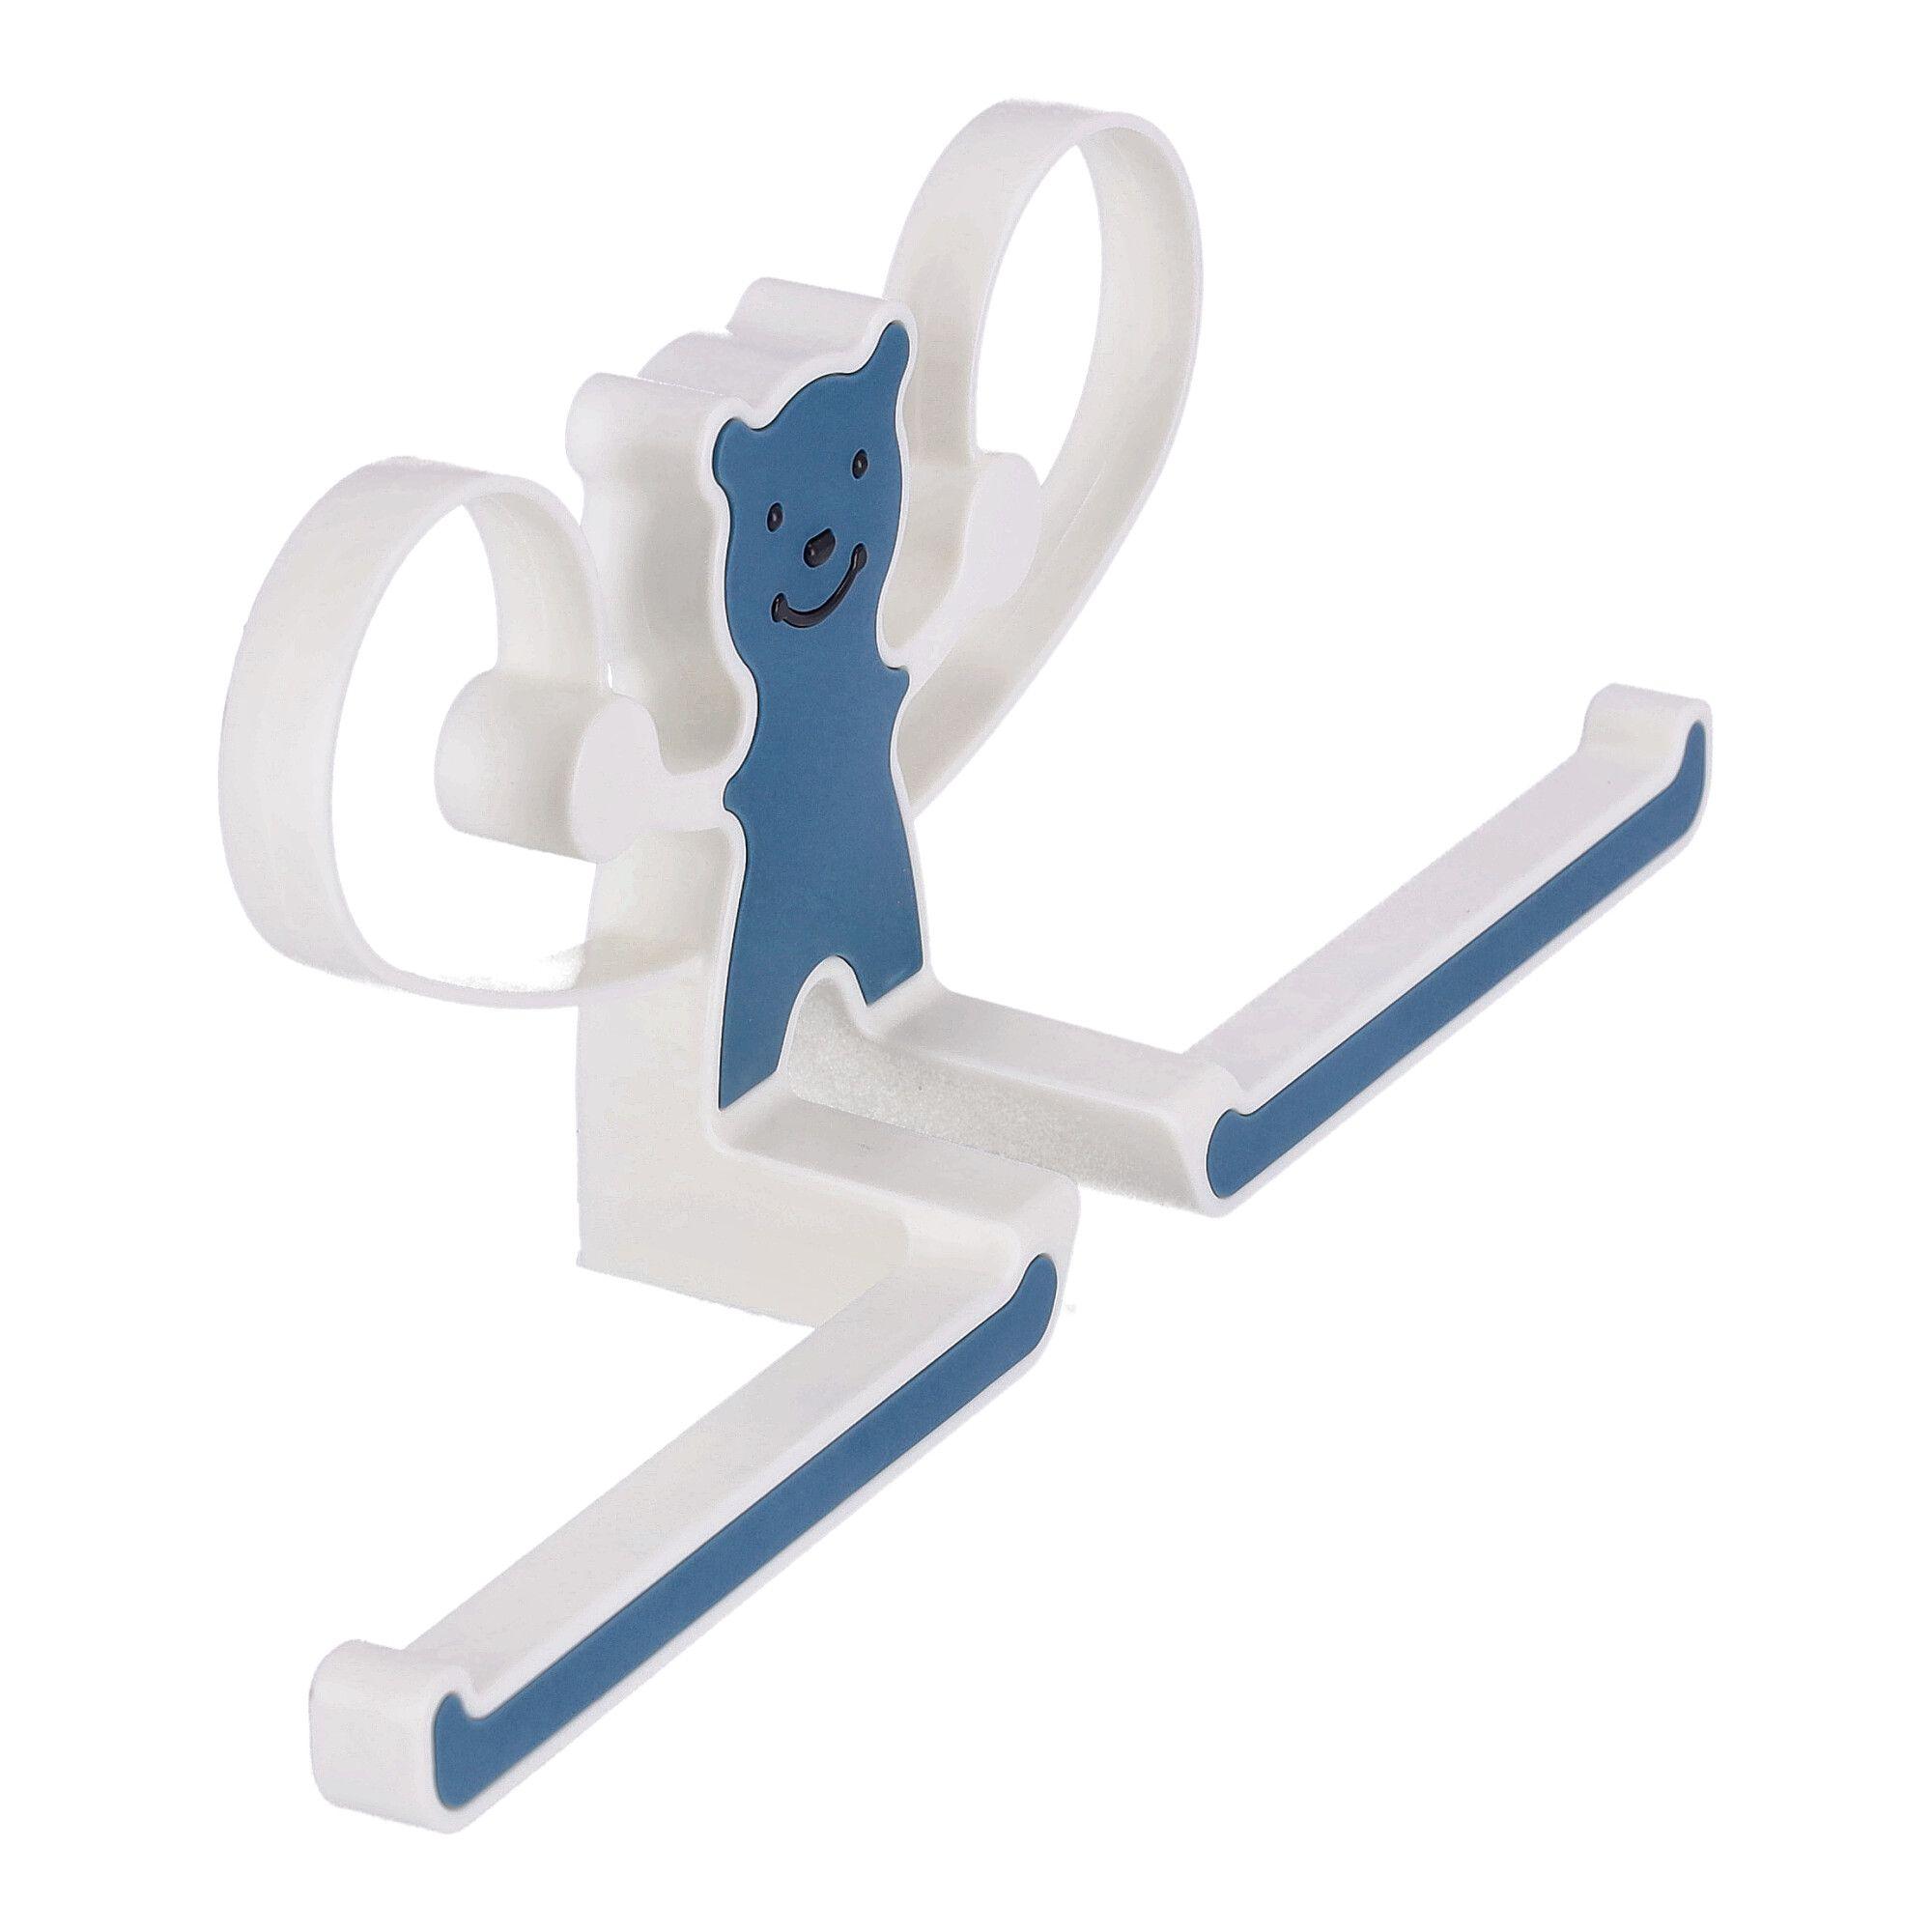 Multifunctional hanger with teddy bear - blue